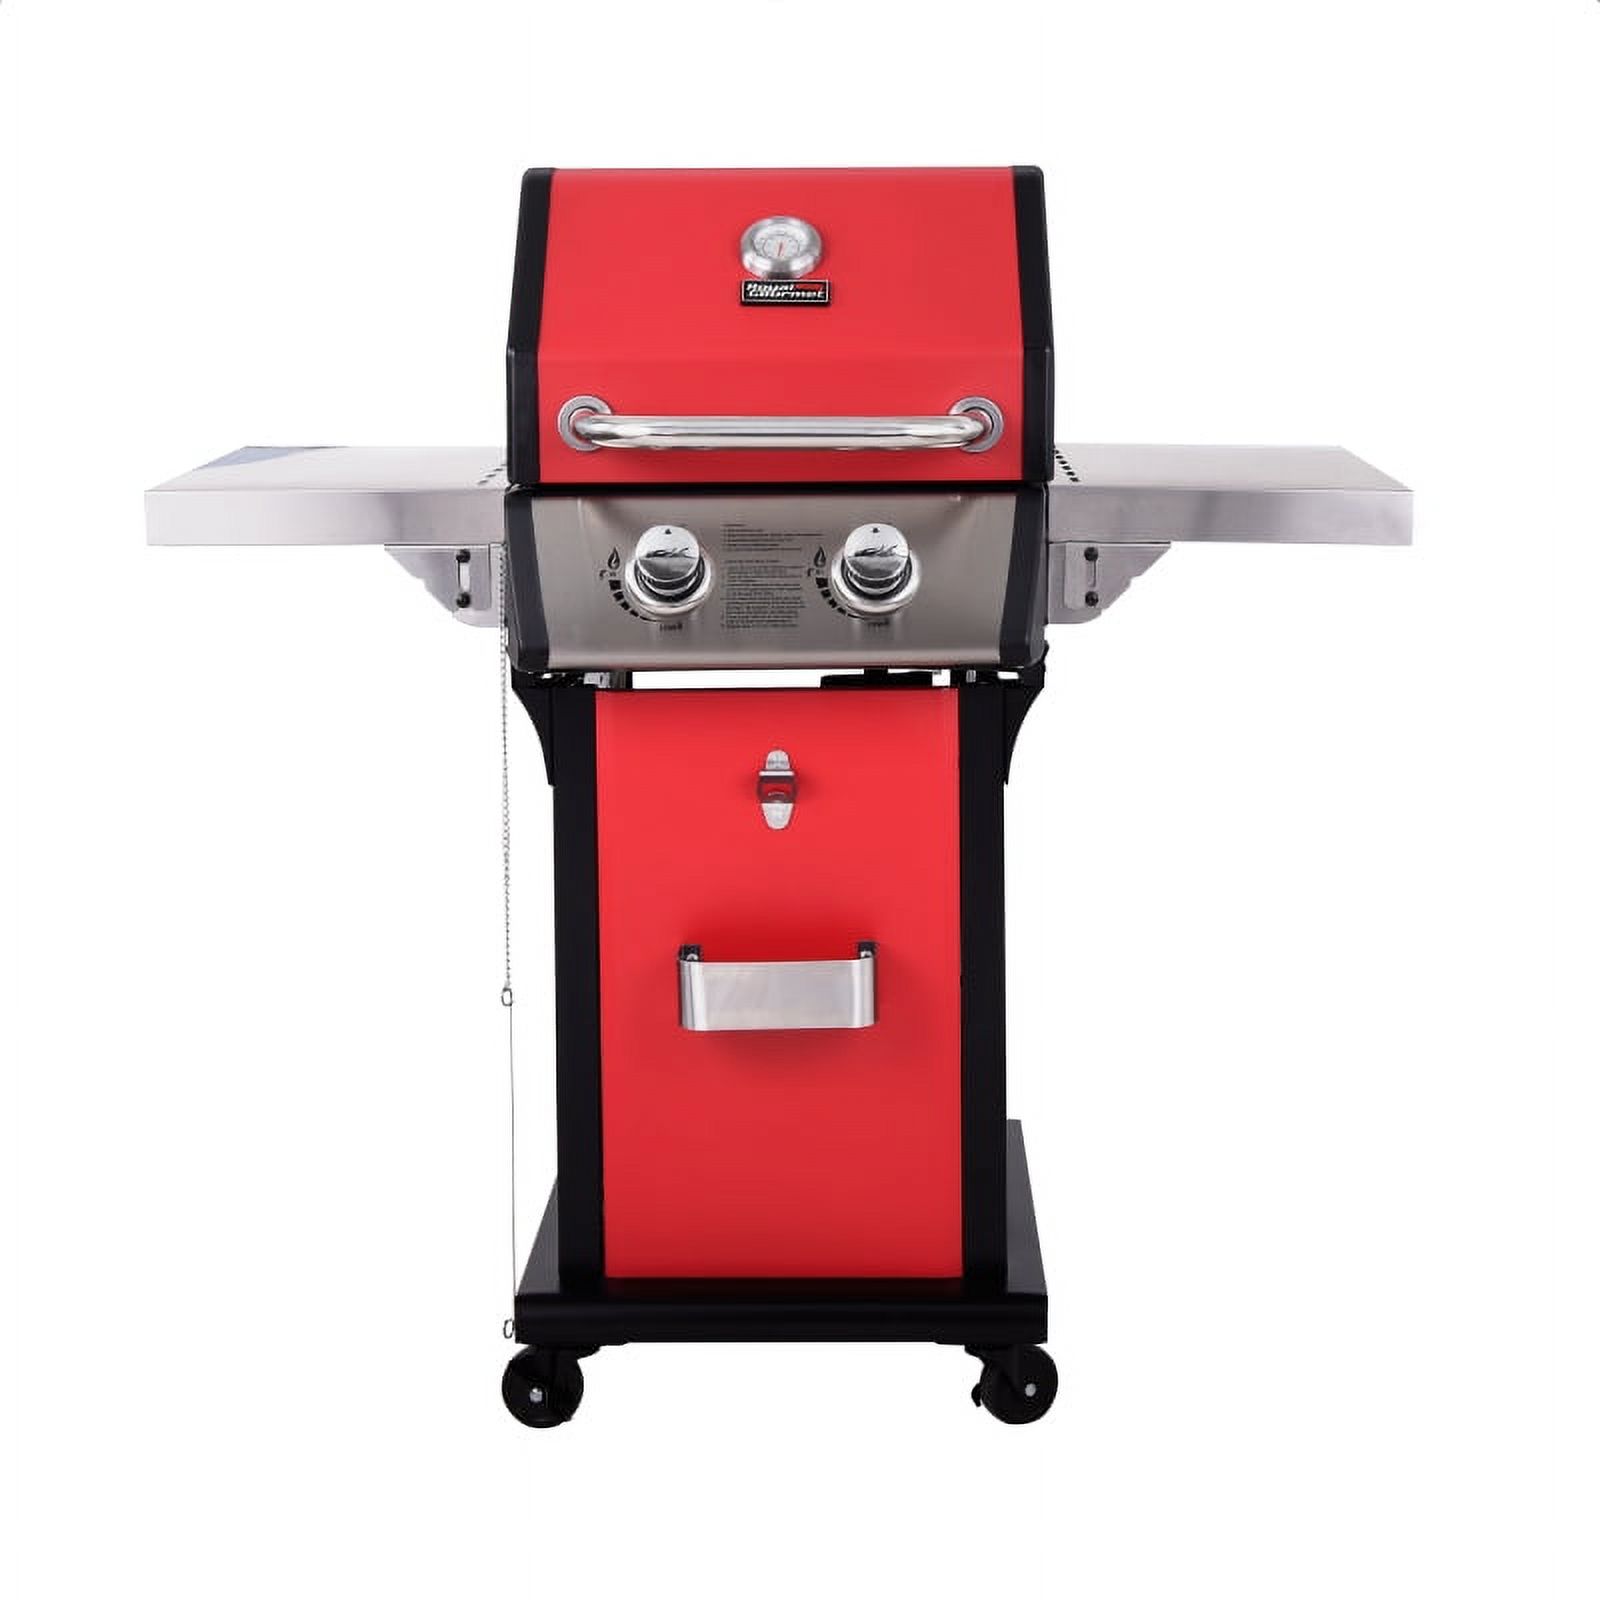 Royal Gourmet GG2004 2-BurnerGas Grill, for Patio Cooking Family Gatherings, Red - image 1 of 3